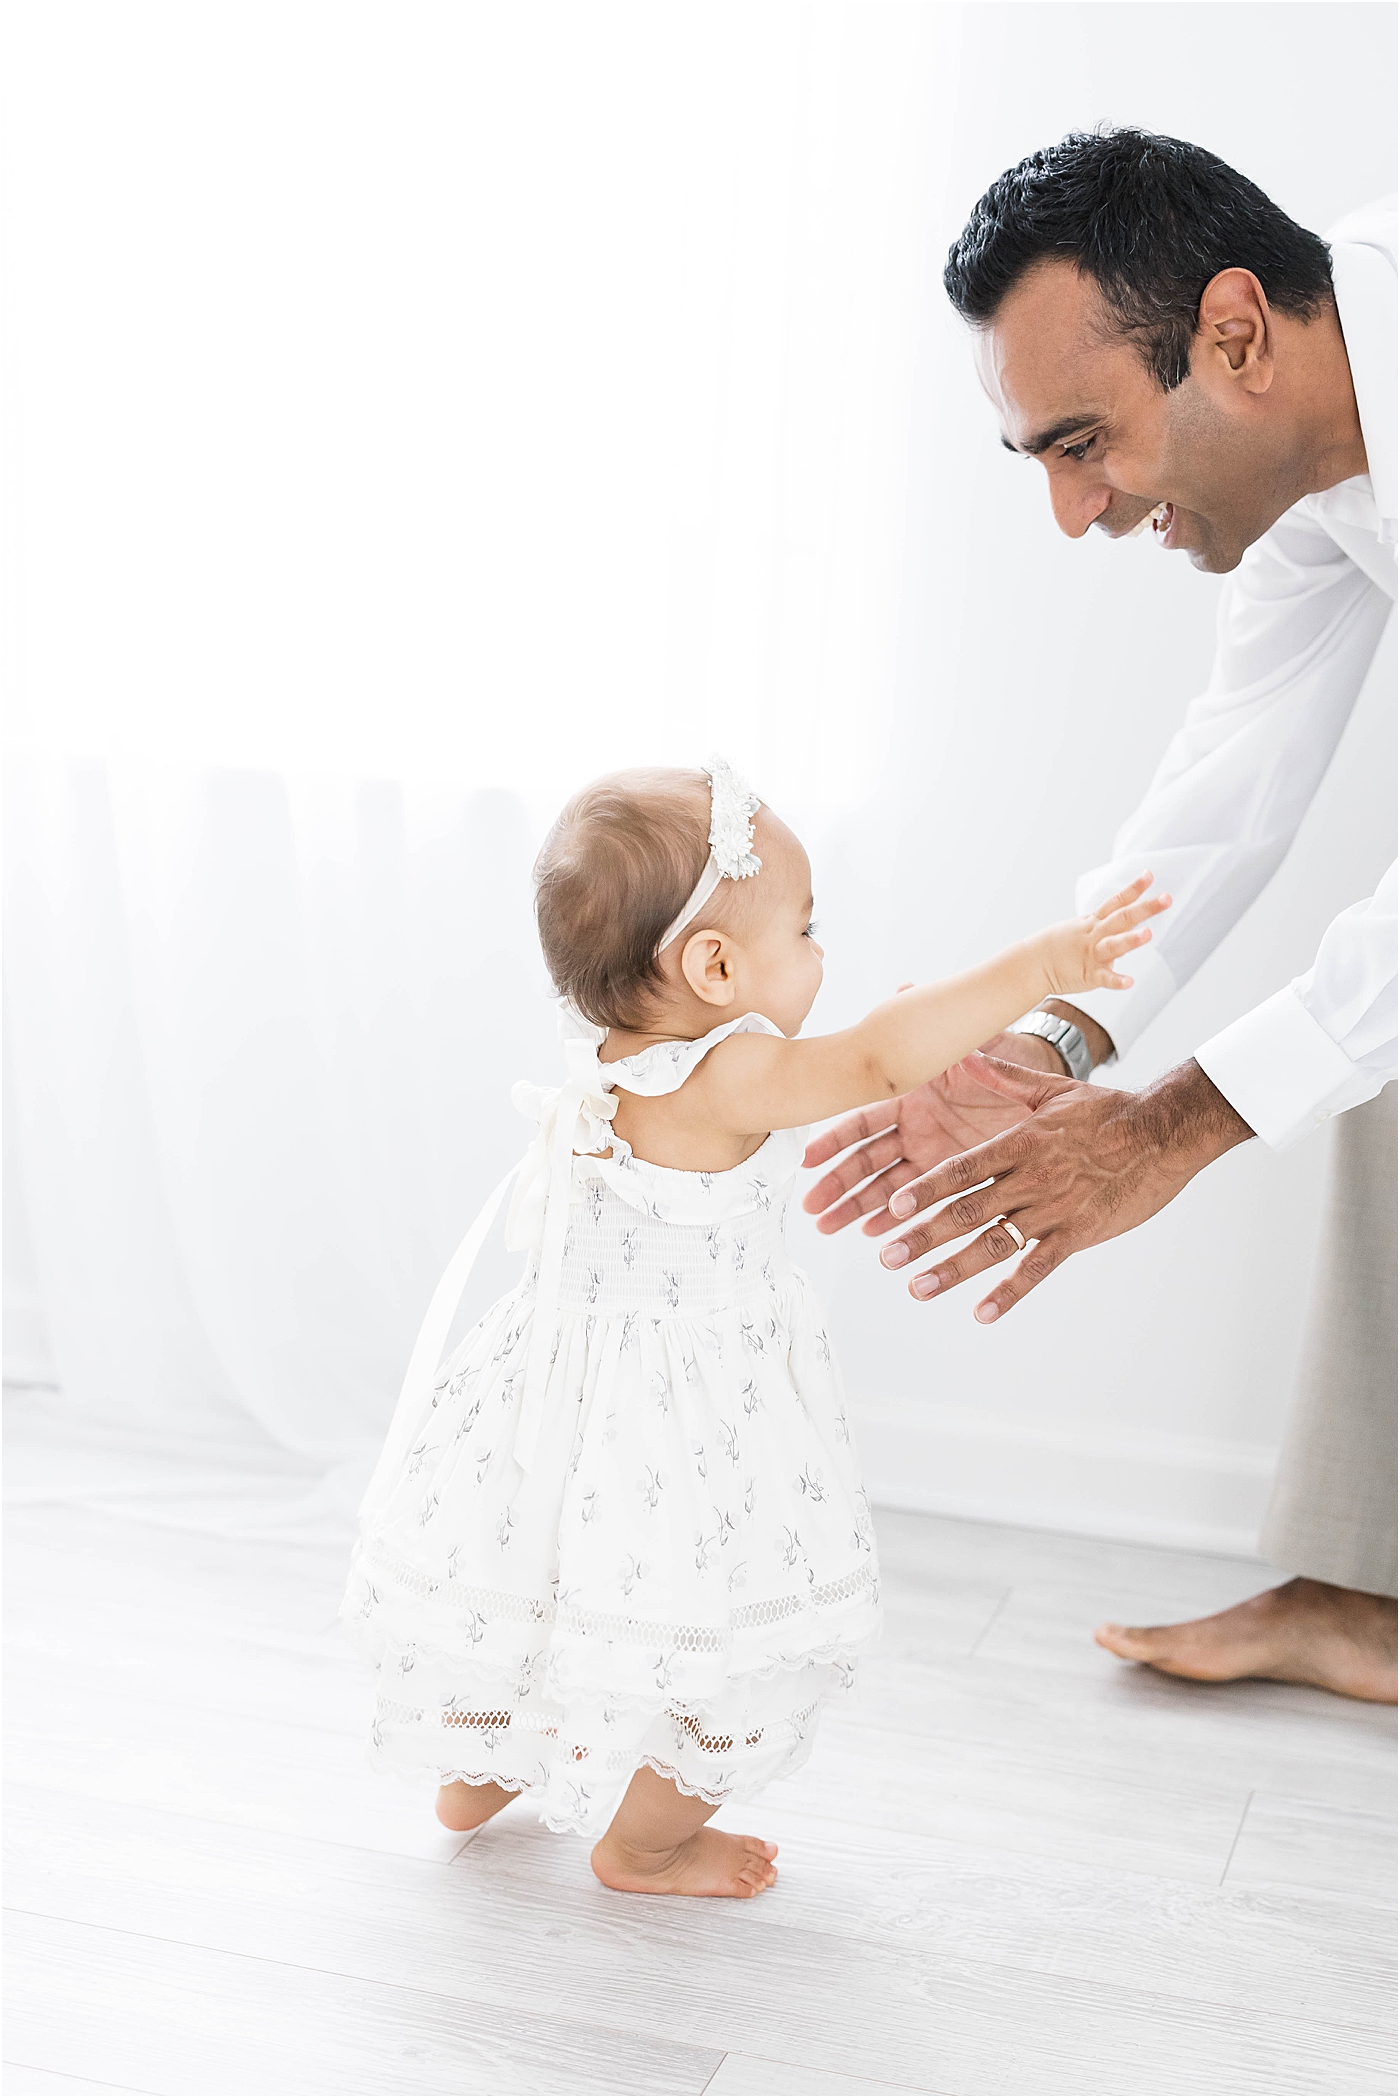 Dad reaching down to pick up his daughter | Lindsay Konopa Photography